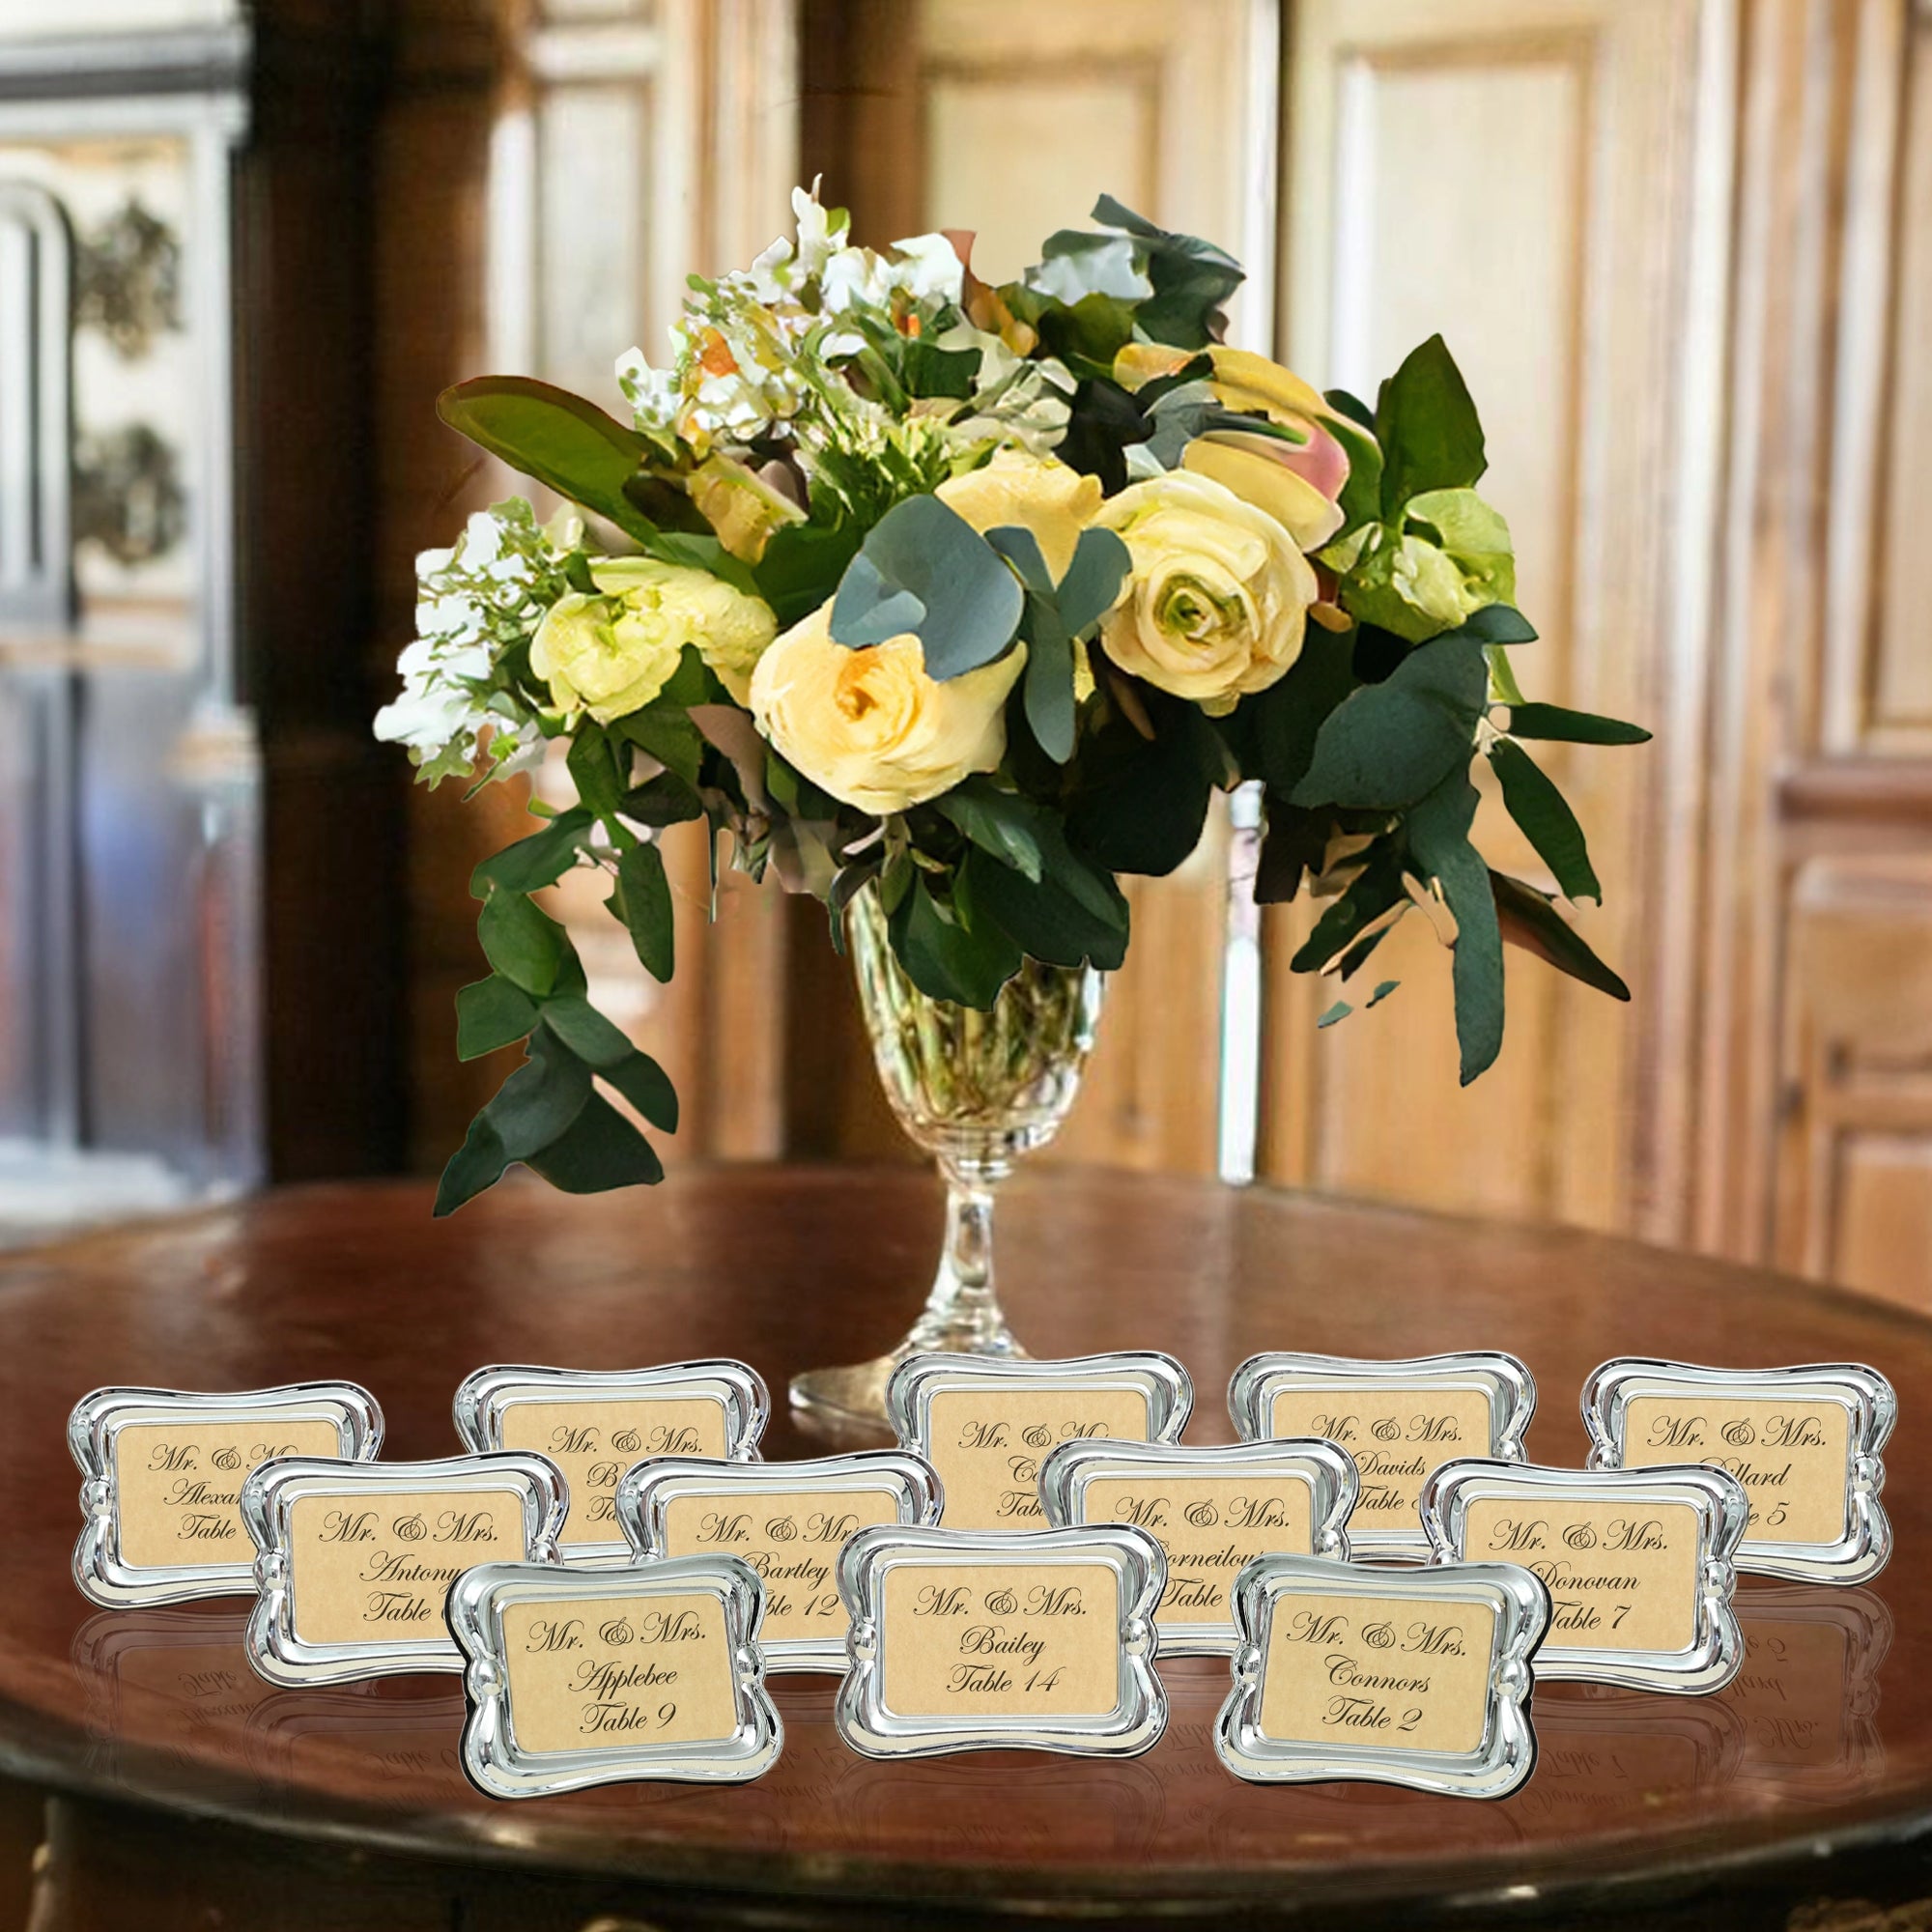 Imperial Silver Place Card Frame